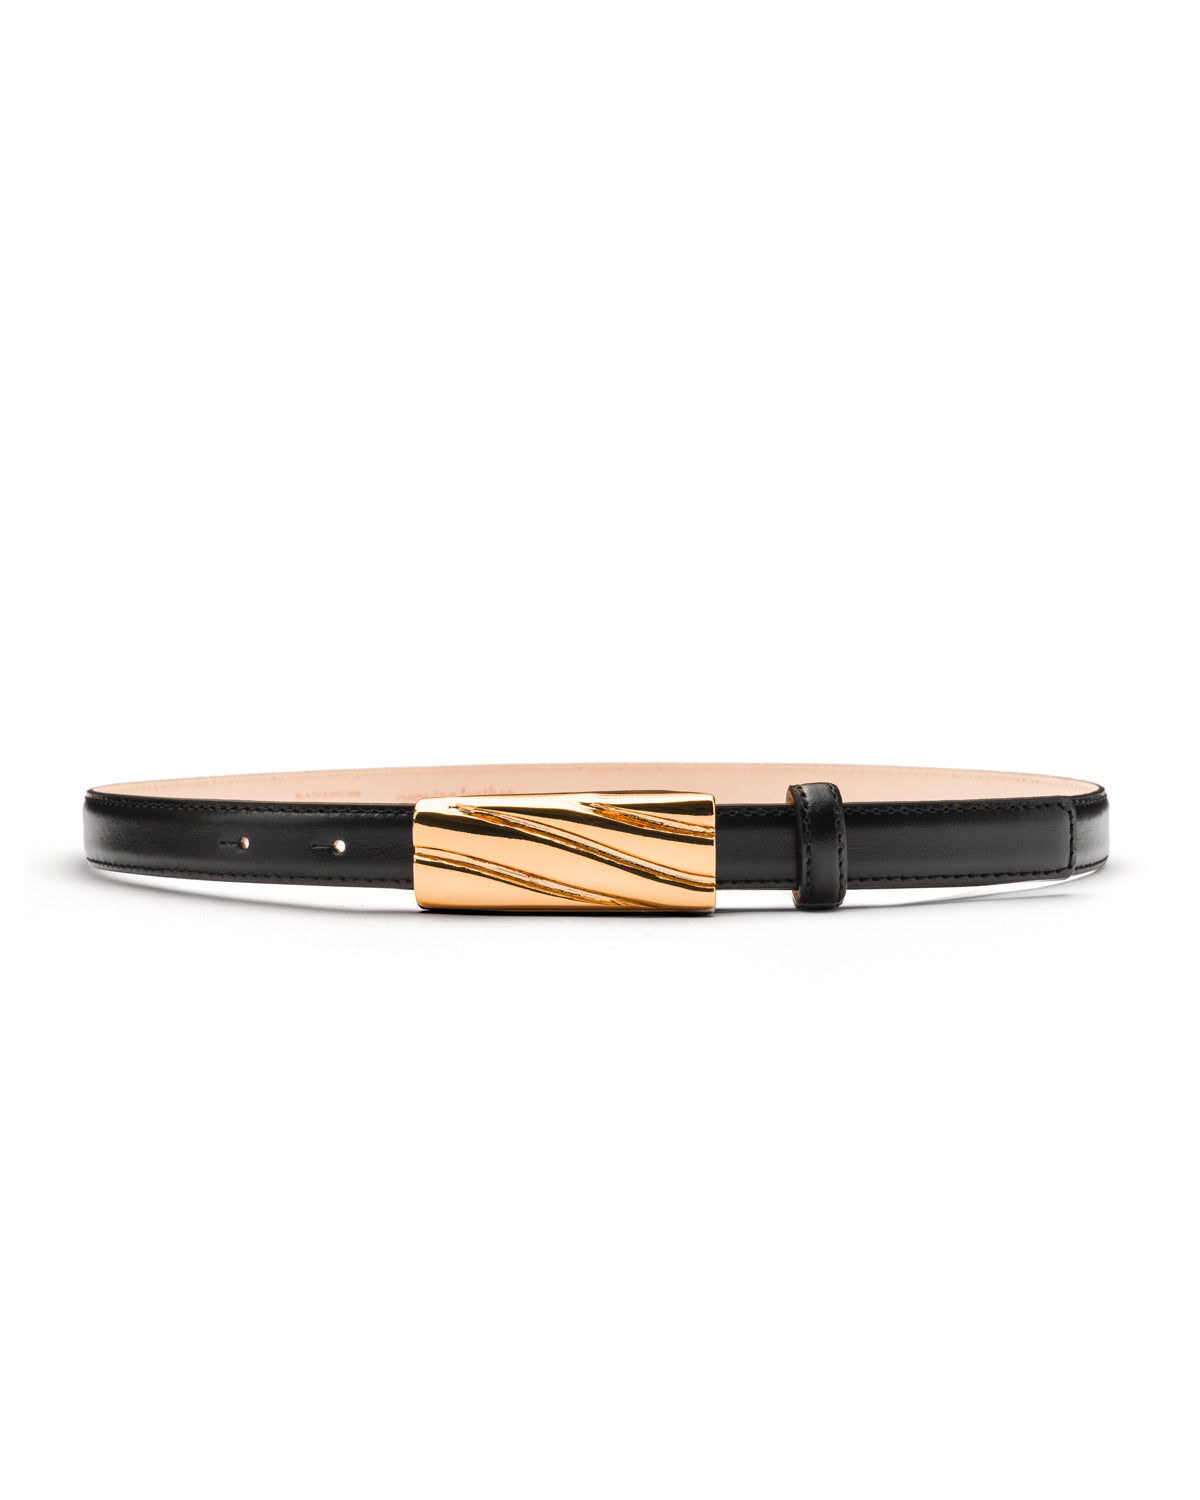 Lily gold embossed buckle black leather belt